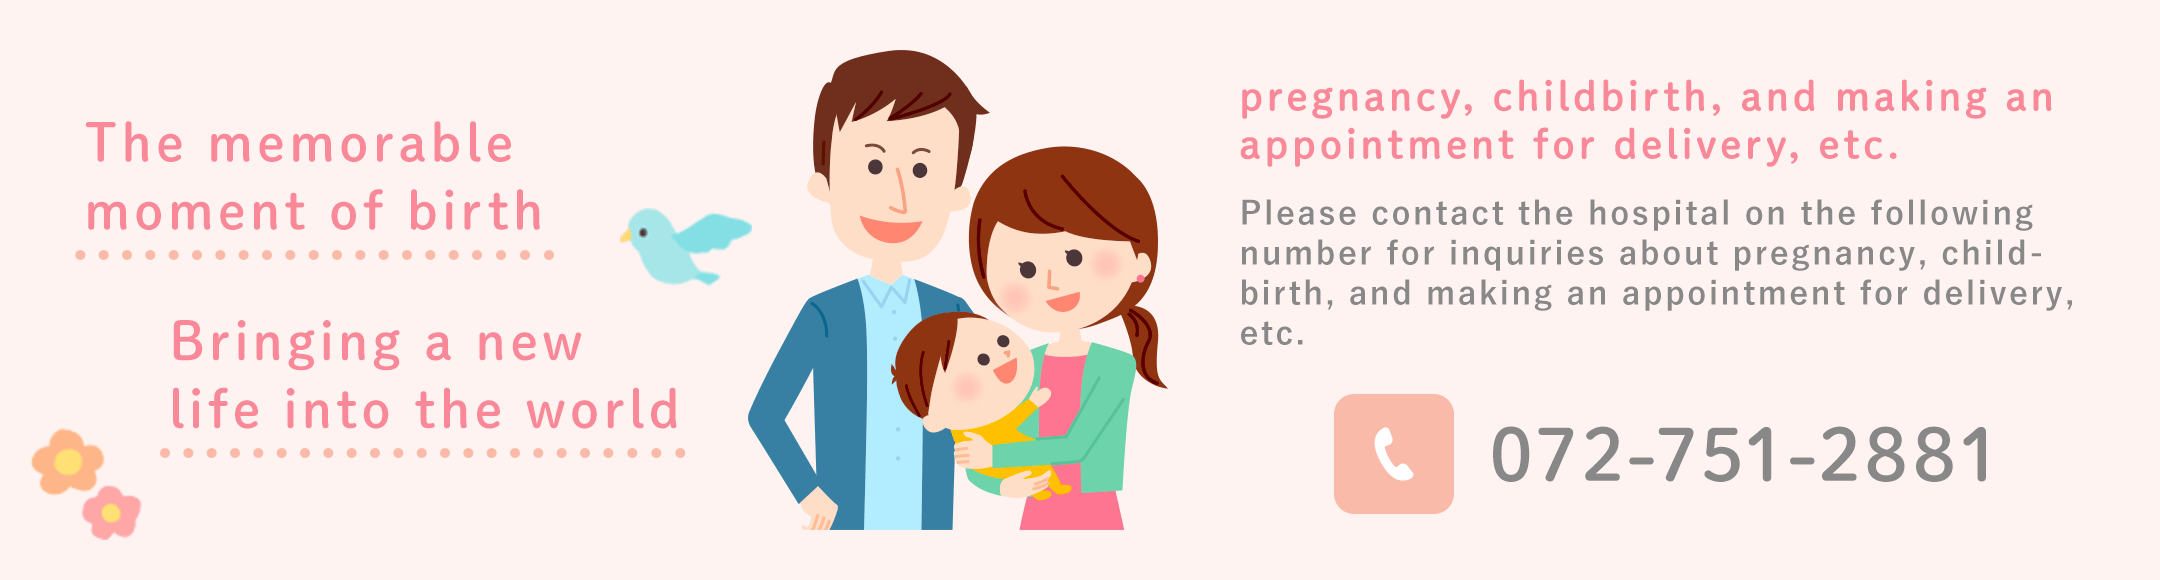 Please contact the hospital on the following number for inquiries about pregnancy, childbirth, and making an appointment for delivery, etc. 072-751-2881